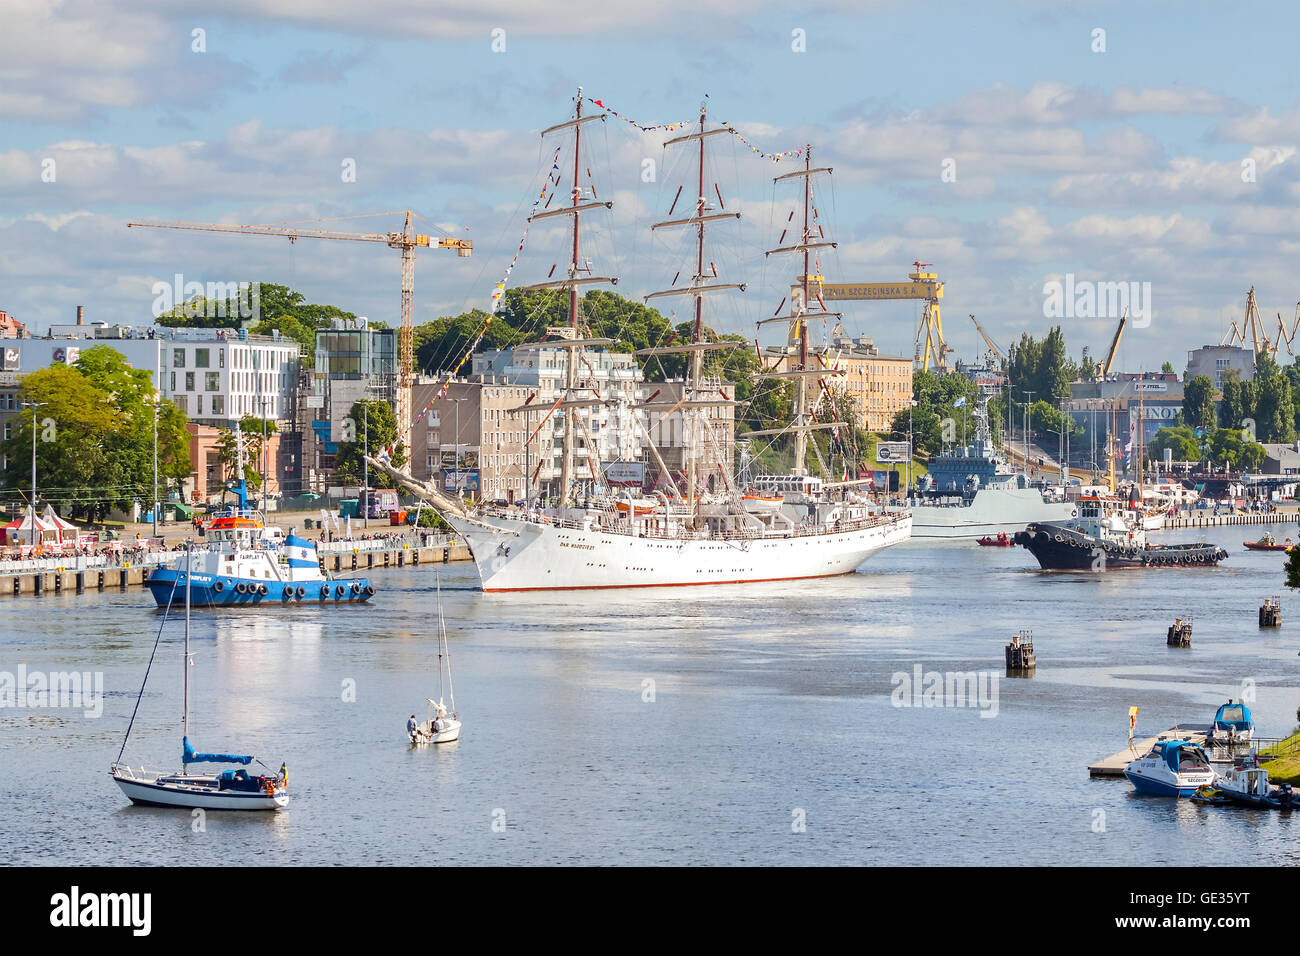 Dar Mlodziezy, one of the biggest ships is about to leave the harbor. Stock Photo